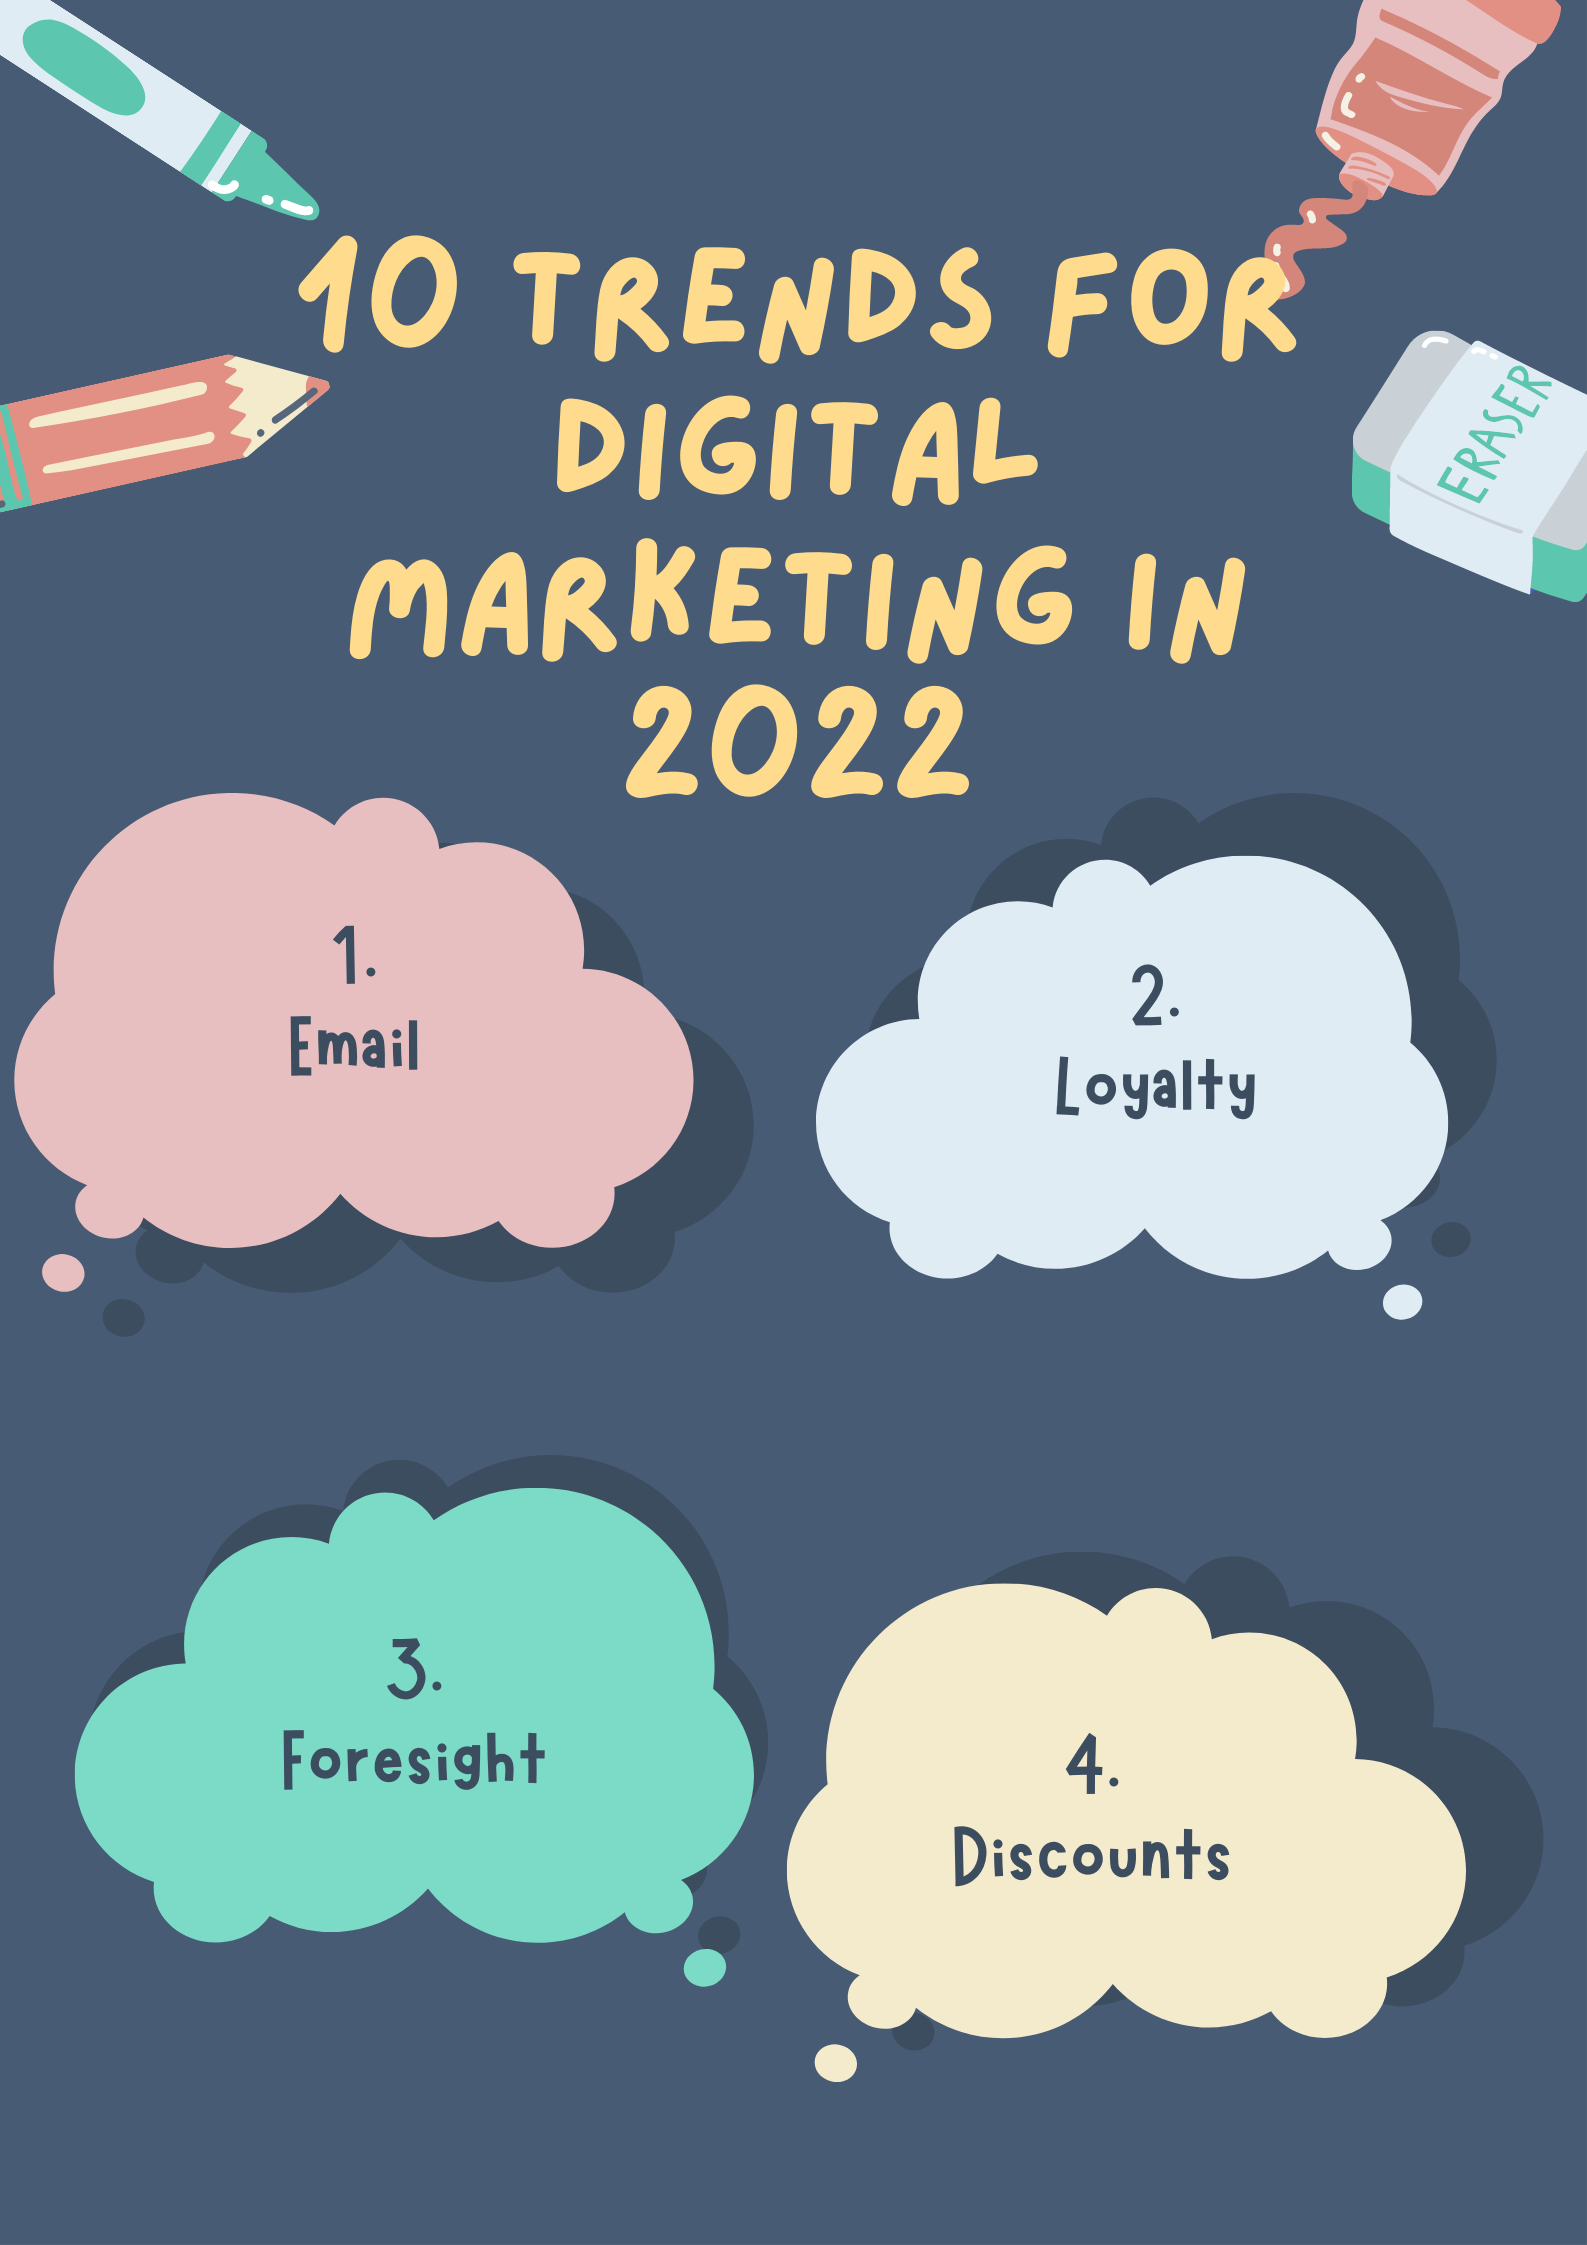 10 Trends For Digital Marketing In 2022